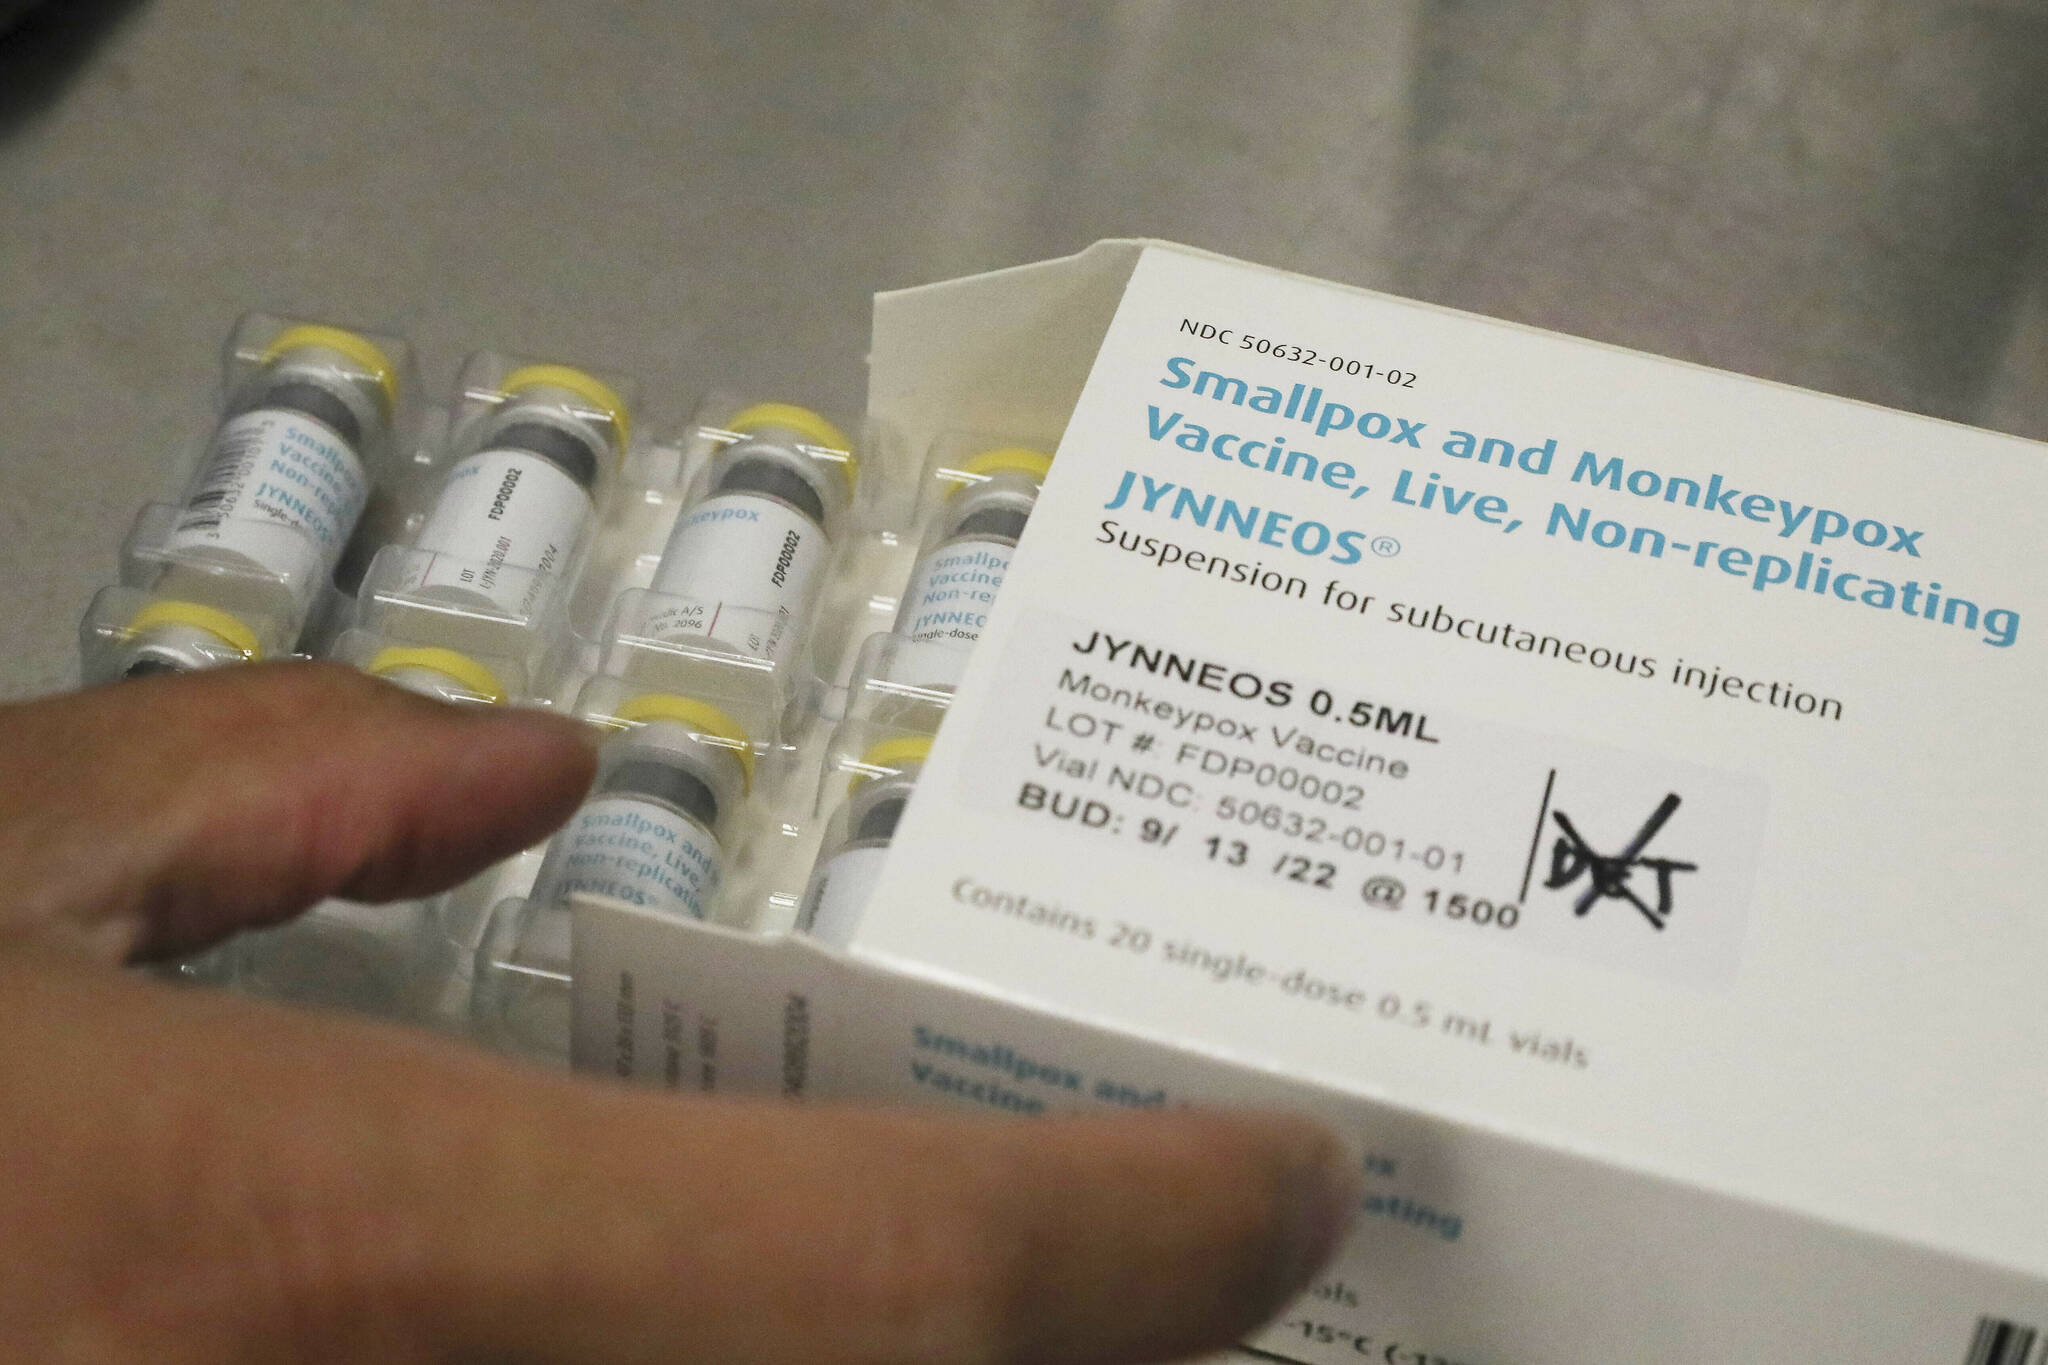 Vials of of the Jynneos vaccine for monkeypox are removed from a box containing 20 doses, in the vaccine hub at Zuckerberg San Francisco General Hospital on Friday, July 29, 2022, in San Francisco. (Lea Suzuki/San Francisco Chronicle via AP)